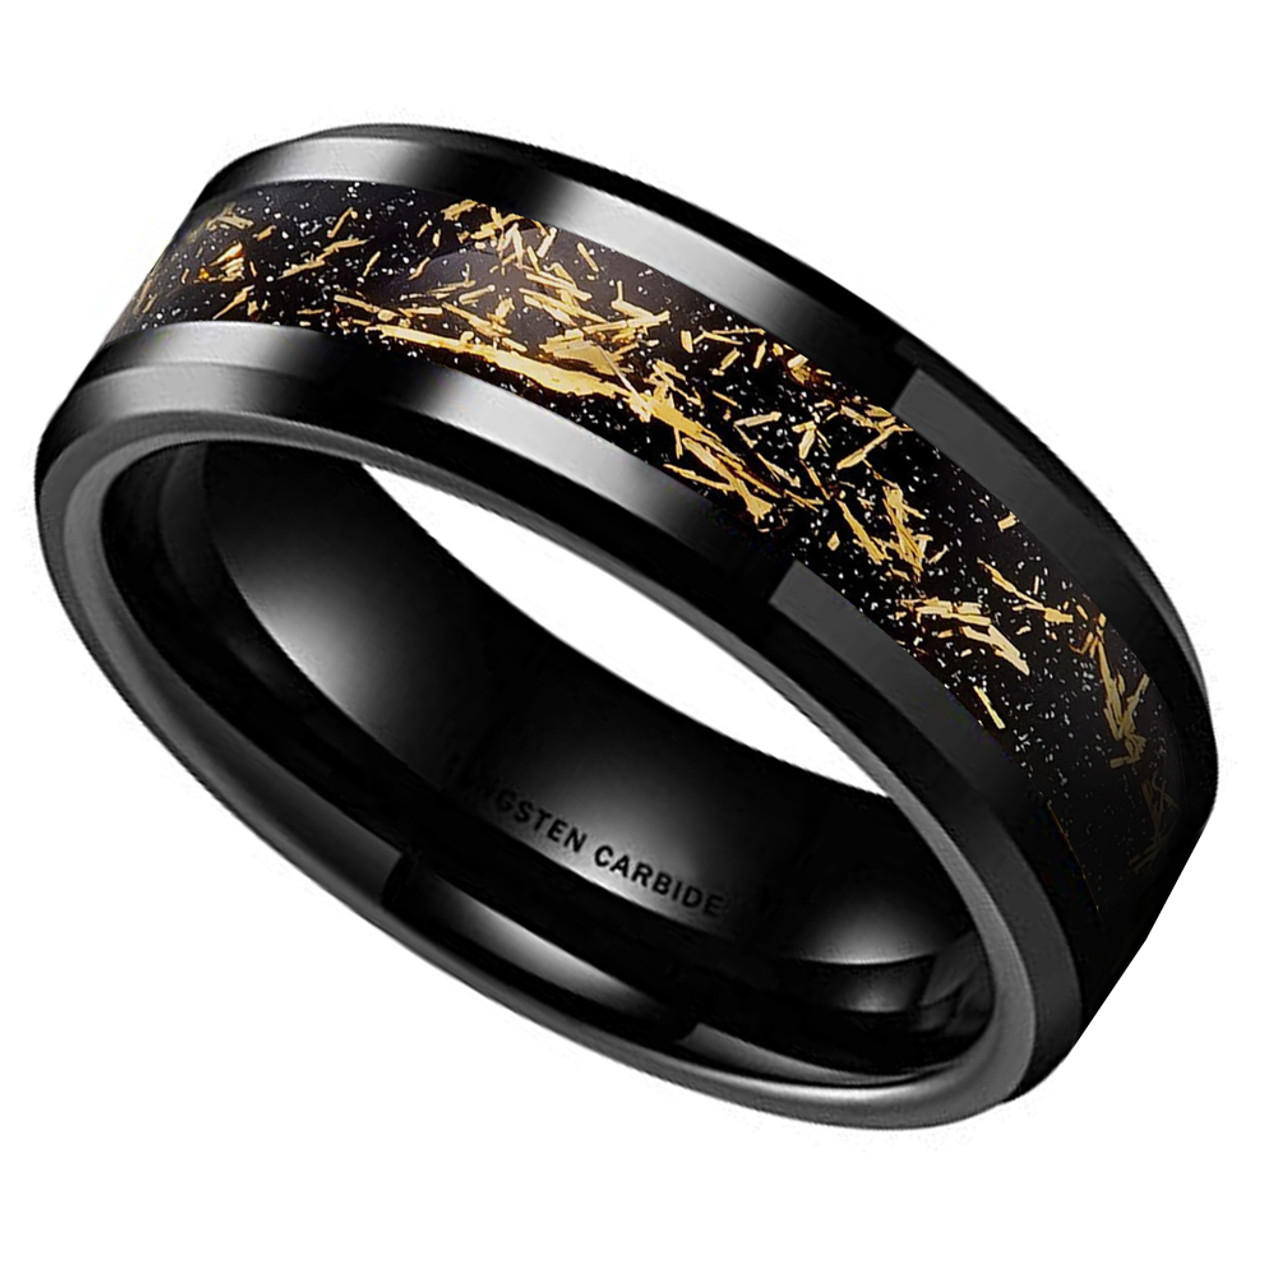 (8mm)  Unisex or Men's Tungsten Carbide Wedding ring band. Wedding ring band Black with Gold Foil Inlay. Tungsten Carbide Ring